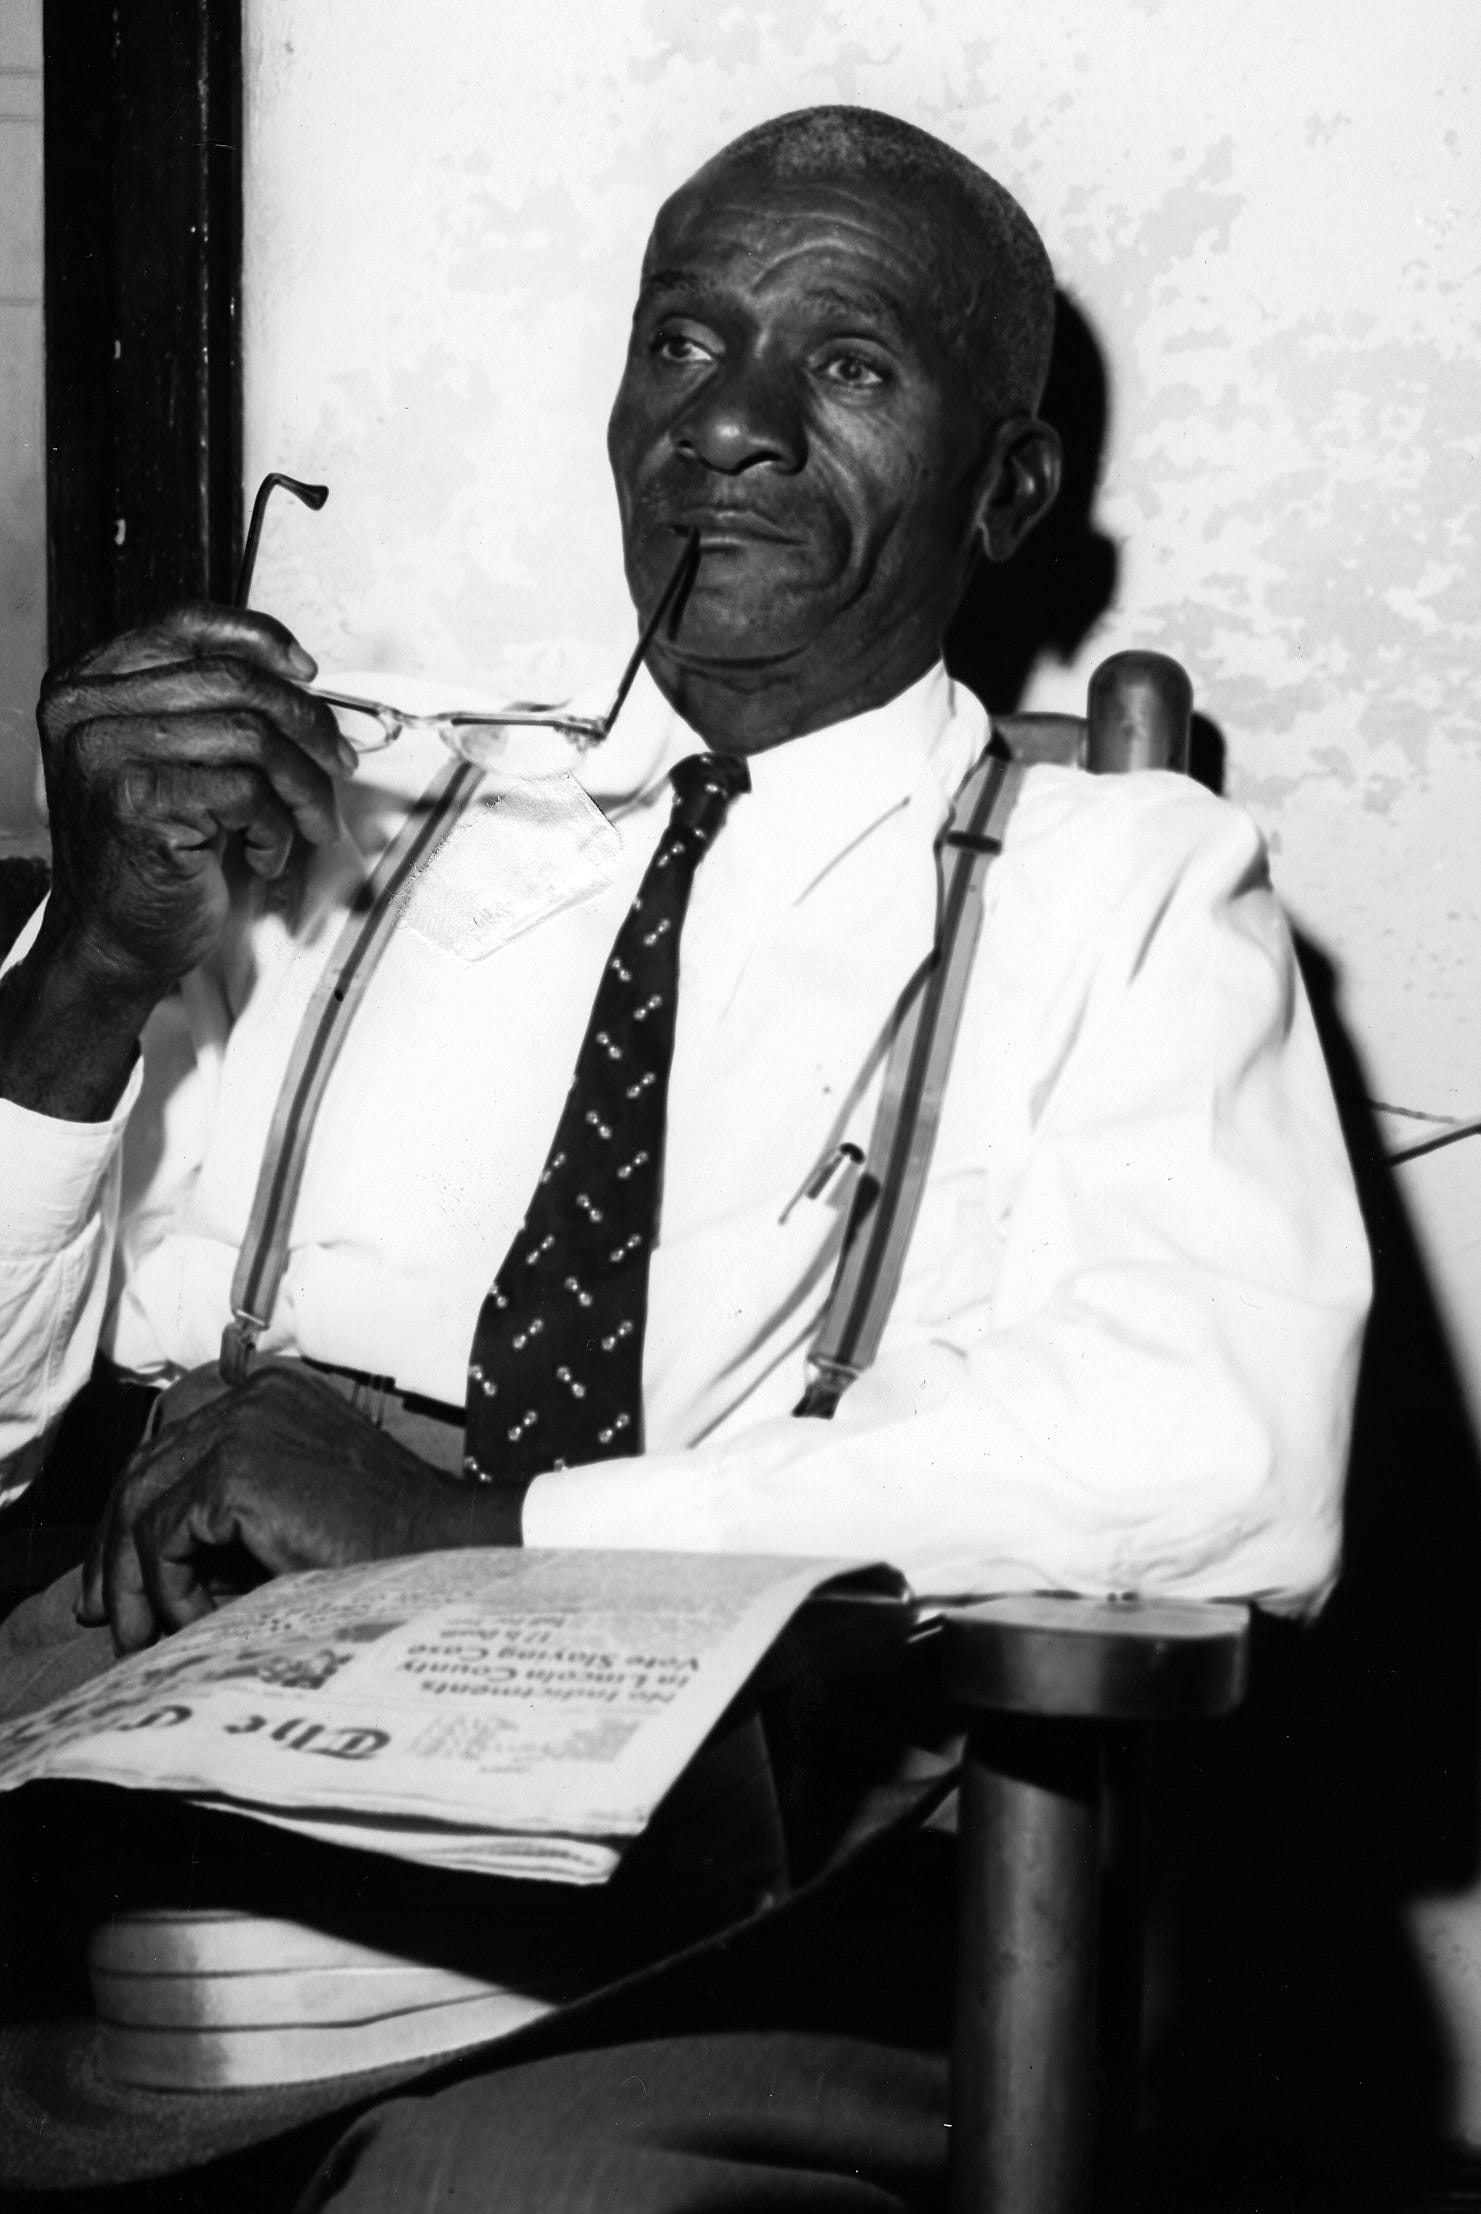 Mose Wright, a LeFlore County farmer, was the uncle Emmett Till came from Chicago to visit in the summer of 1955. Wright testified in the murder trial of Roy Bryant and J.W. Milam that they were the two men who took till from Wright's home in the early hours of August 28, 1955.